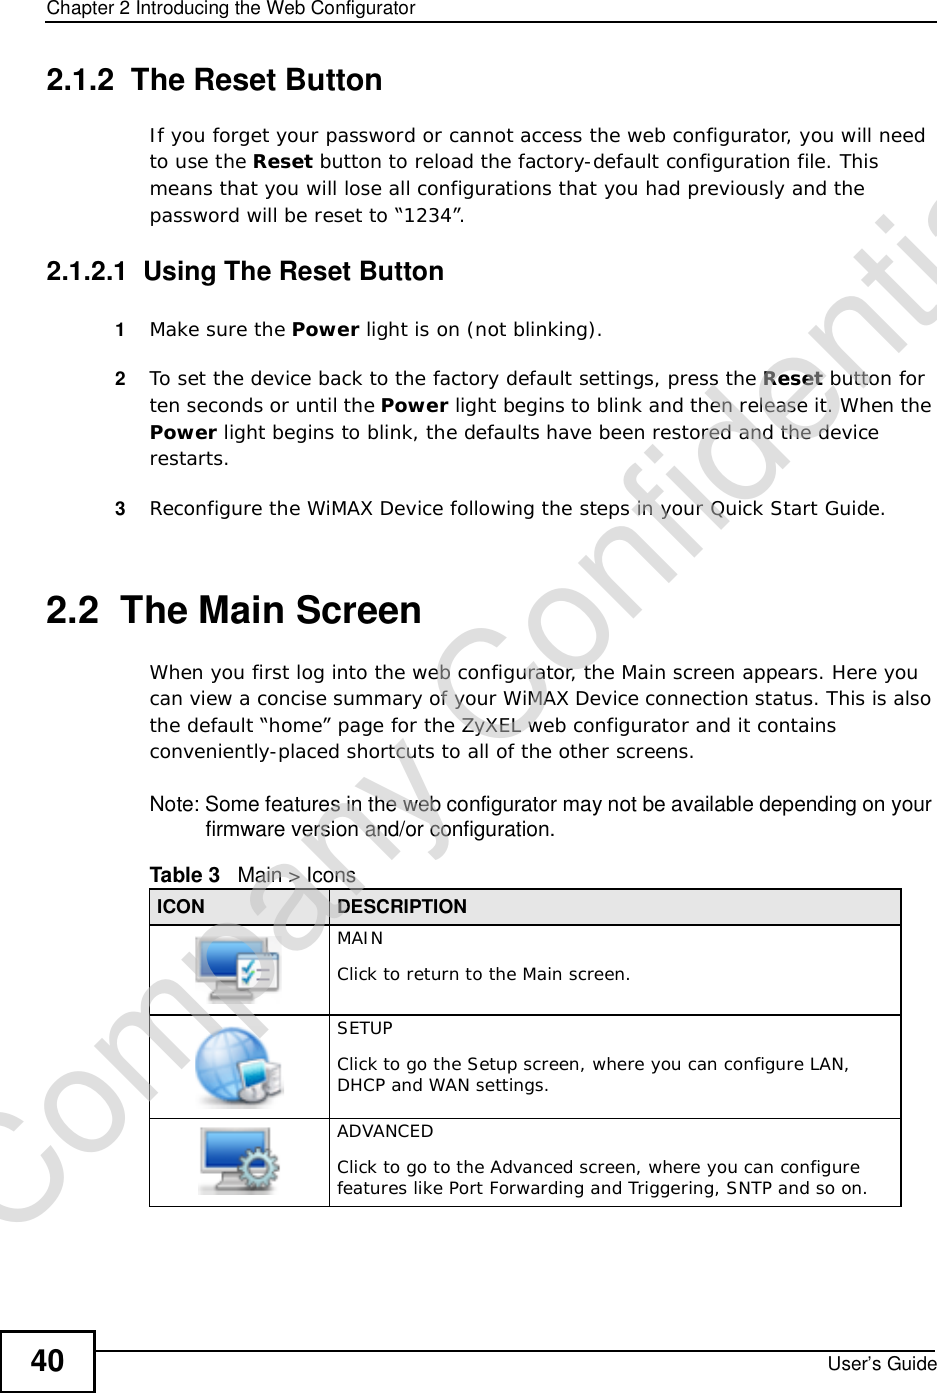 Chapter 2Introducing the Web ConfiguratorUser’s Guide402.1.2  The Reset ButtonIf you forget your password or cannot access the web configurator, you will need to use the Reset button to reload the factory-default configuration file. This means that you will lose all configurations that you had previously and the password will be reset to “1234”.2.1.2.1  Using The Reset Button1Make sure the Power light is on (not blinking).2To set the device back to the factory default settings, press the Reset button for ten seconds or until the Power light begins to blink and then release it. When the Power light begins to blink, the defaults have been restored and the device restarts.3Reconfigure the WiMAX Device following the steps in your Quick Start Guide.2.2  The Main ScreenWhen you first log into the web configurator, the Main screen appears. Here you can view a concise summary of your WiMAX Device connection status. This is also the default “home” page for the ZyXEL web configurator and it contains conveniently-placed shortcuts to all of the other screens.Note: Some features in the web configurator may not be available depending on your firmware version and/or configuration.Table 3   Main &gt; IconsICON DESCRIPTIONMAINClick to return to the Main screen.SETUPClick to go the Setup screen, where you can configure LAN, DHCP and WAN settings.ADVANCEDClick to go to the Advanced screen, where you can configure features like Port Forwarding and Triggering, SNTP and so on.Company Confidential